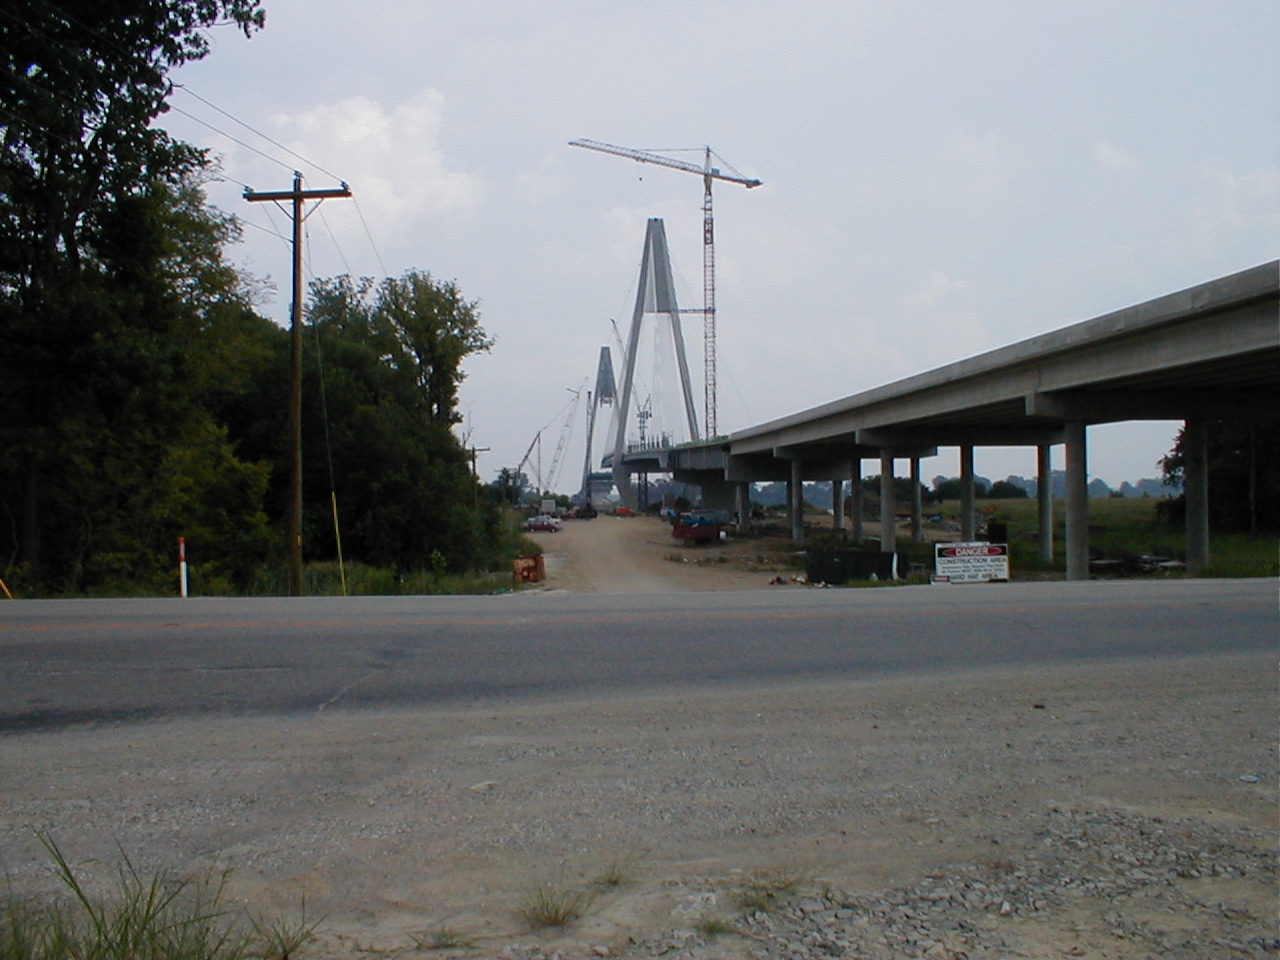 Taken near the IN 66/US 231 intersection. Here it can be seen there the deck of the bridge is not yet complete.